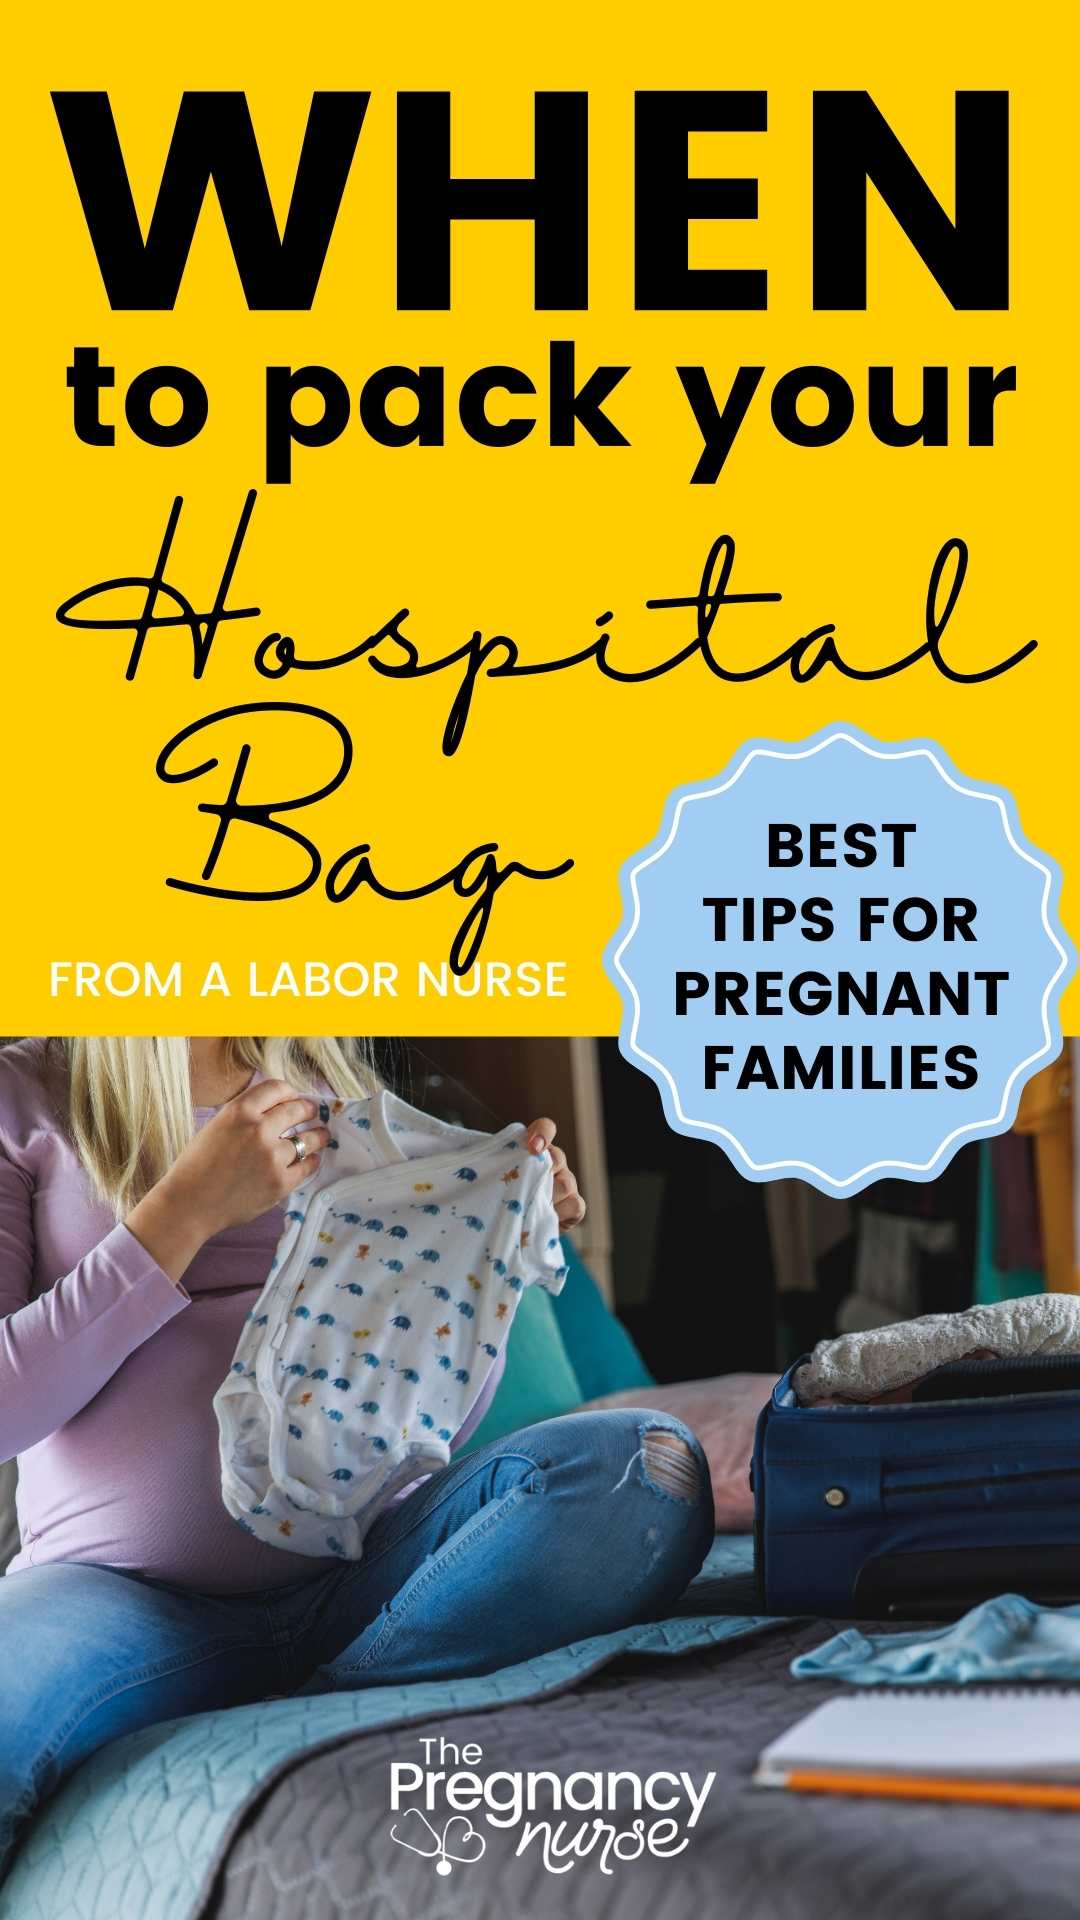 Packing for the hospital can be overwhelming. What do you need? When do you need it? The Pregnancy Nurse is here to help with a comprehensive list of what you and your partner will need when baby comes. From delivery, to post-birth care, this list has everything covered!